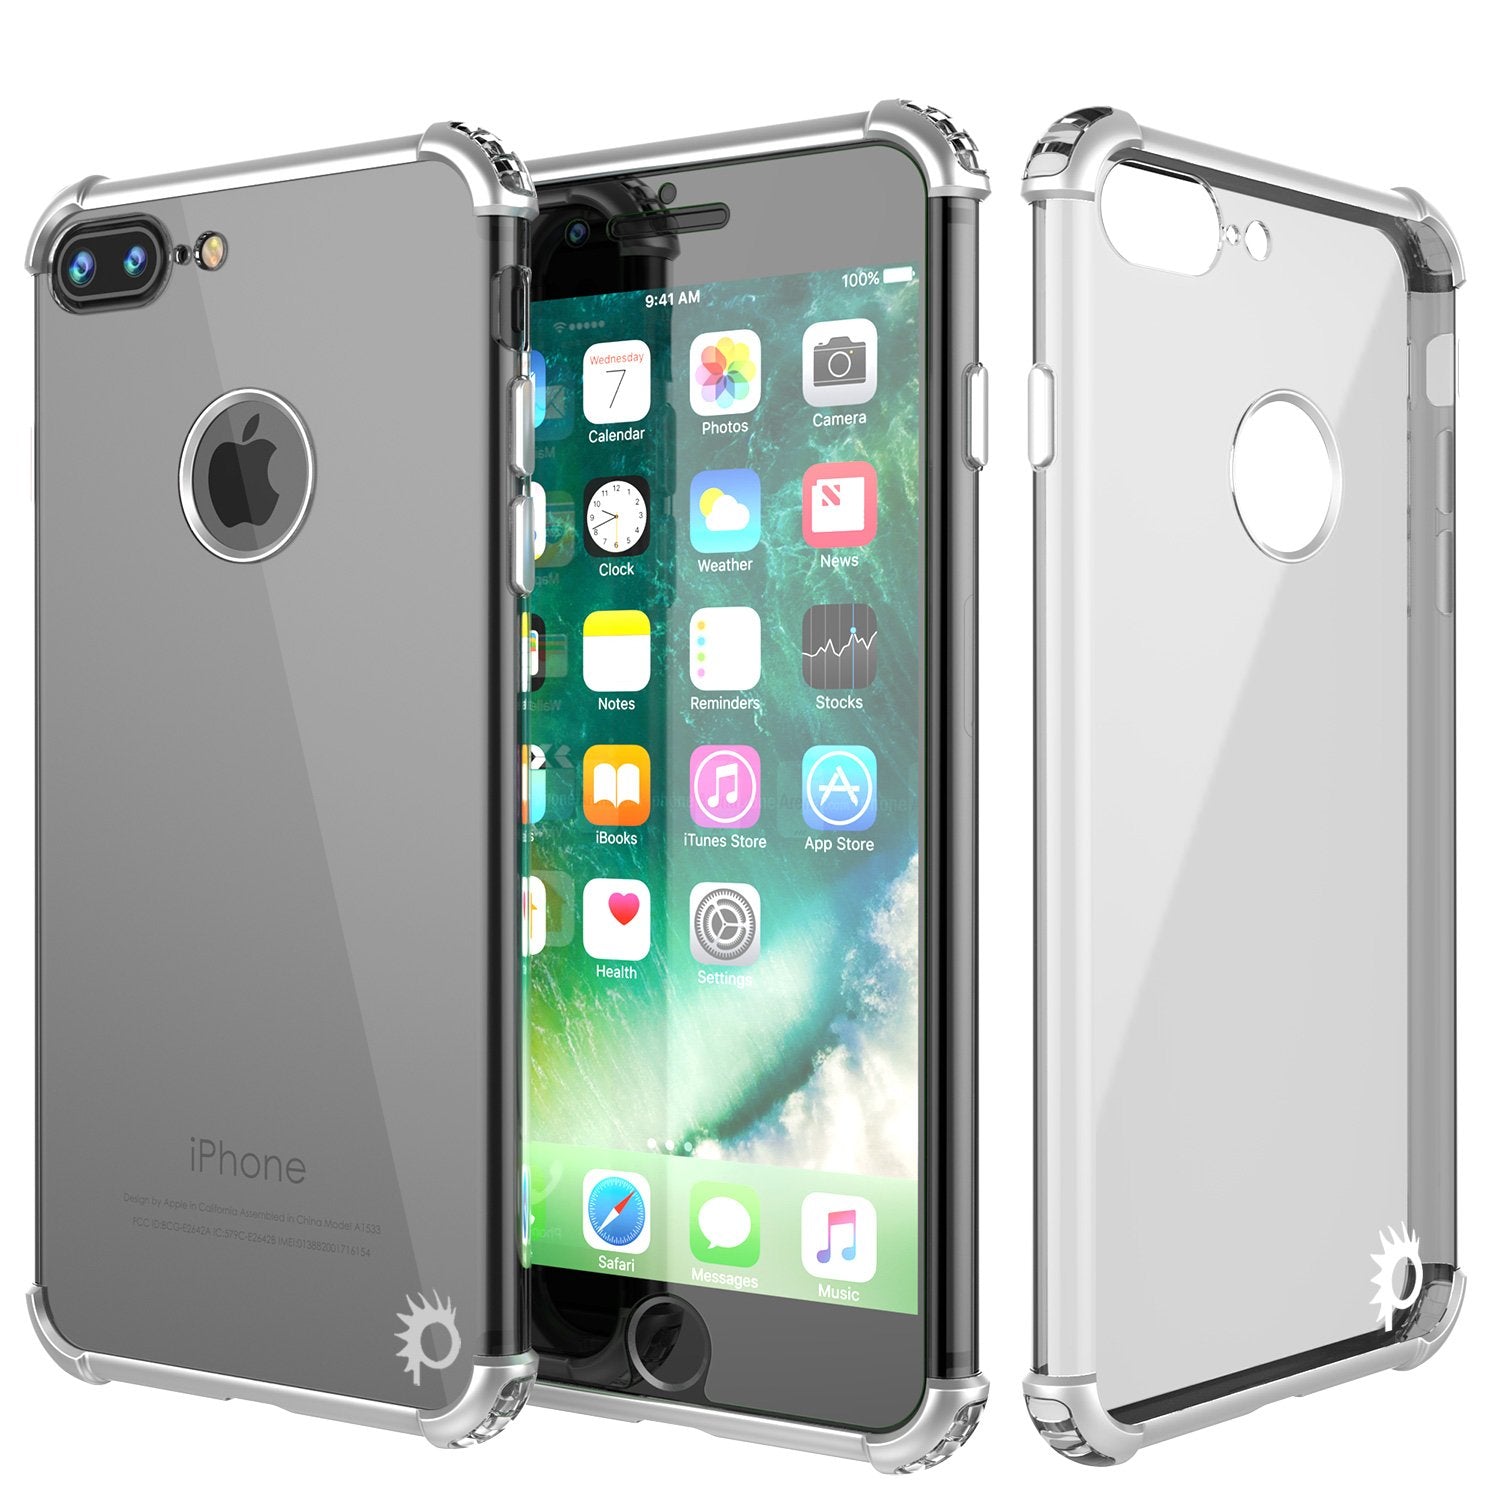 iPhone 7 PLUS Case, Punkcase [BLAZE SERIES] Protective Cover W/ PunkShield Screen Protector [Shockproof] [Slim Fit] for Apple iPhone 7 PLUS [Silver]